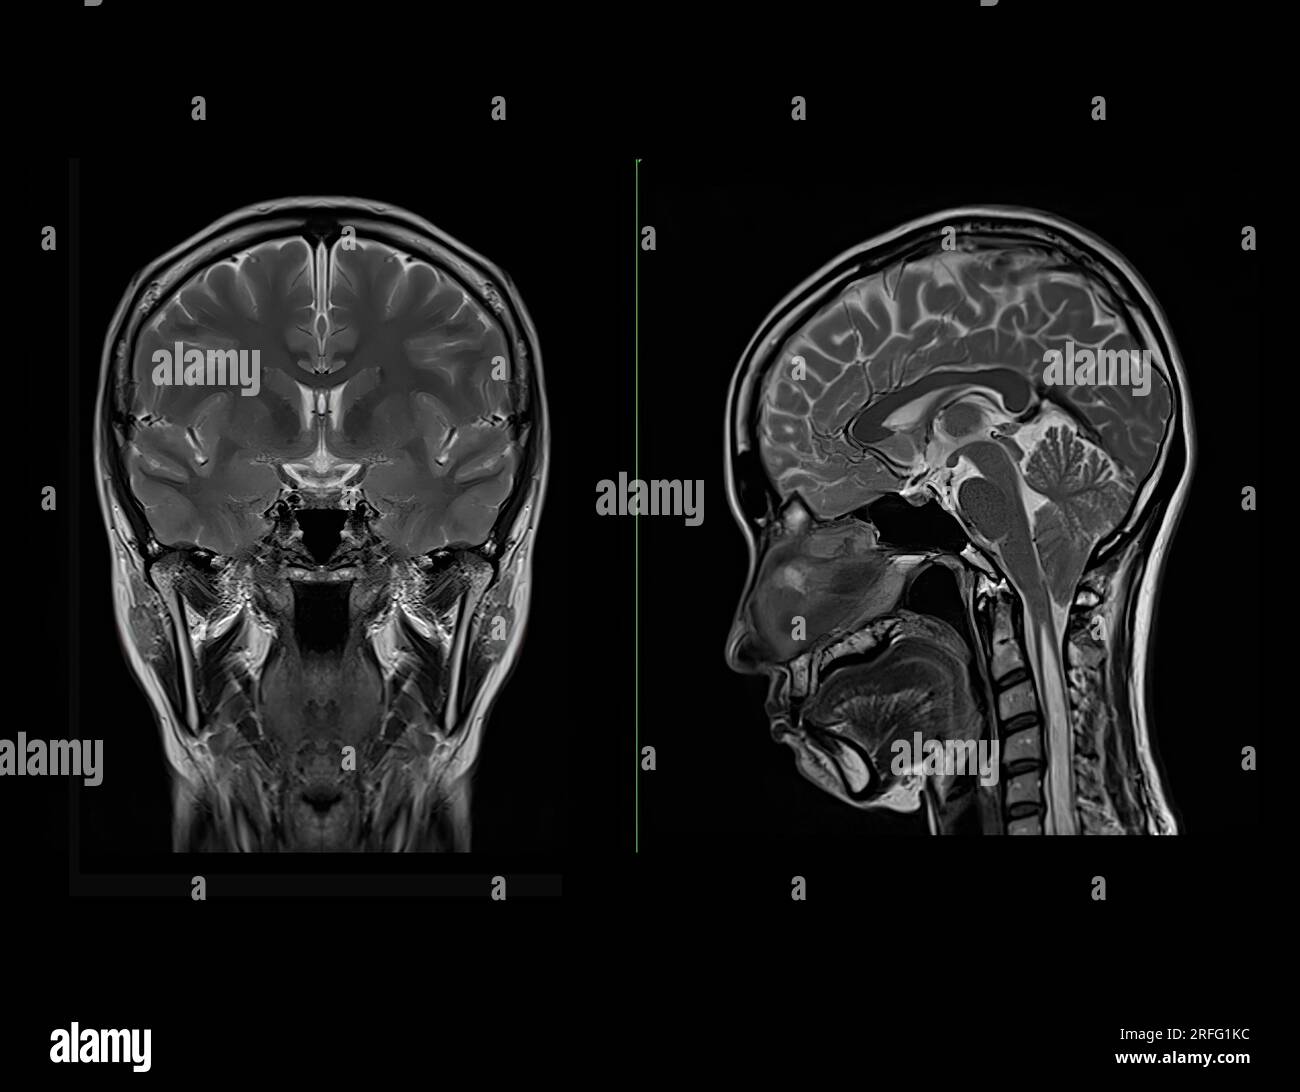 MRI  brain scan  Compare Coronal and sagittal plane for detect  Brain  diseases sush as stroke disease, Brain tumors and Infections. Stock Photo